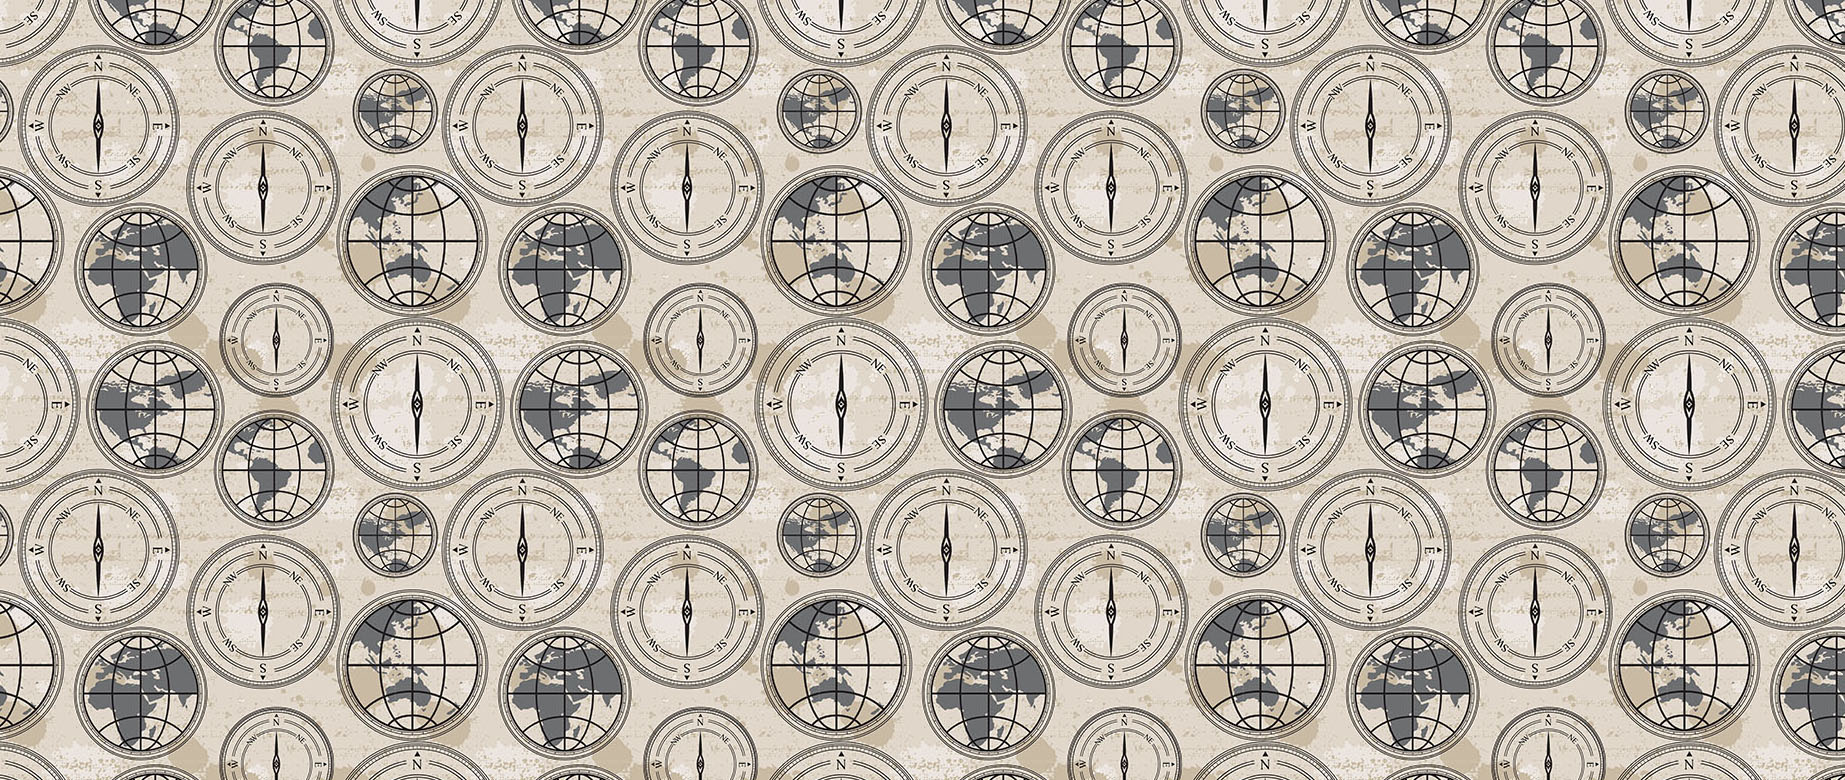 vintage-earth-compass-wallpaper-seamless-repeat-view